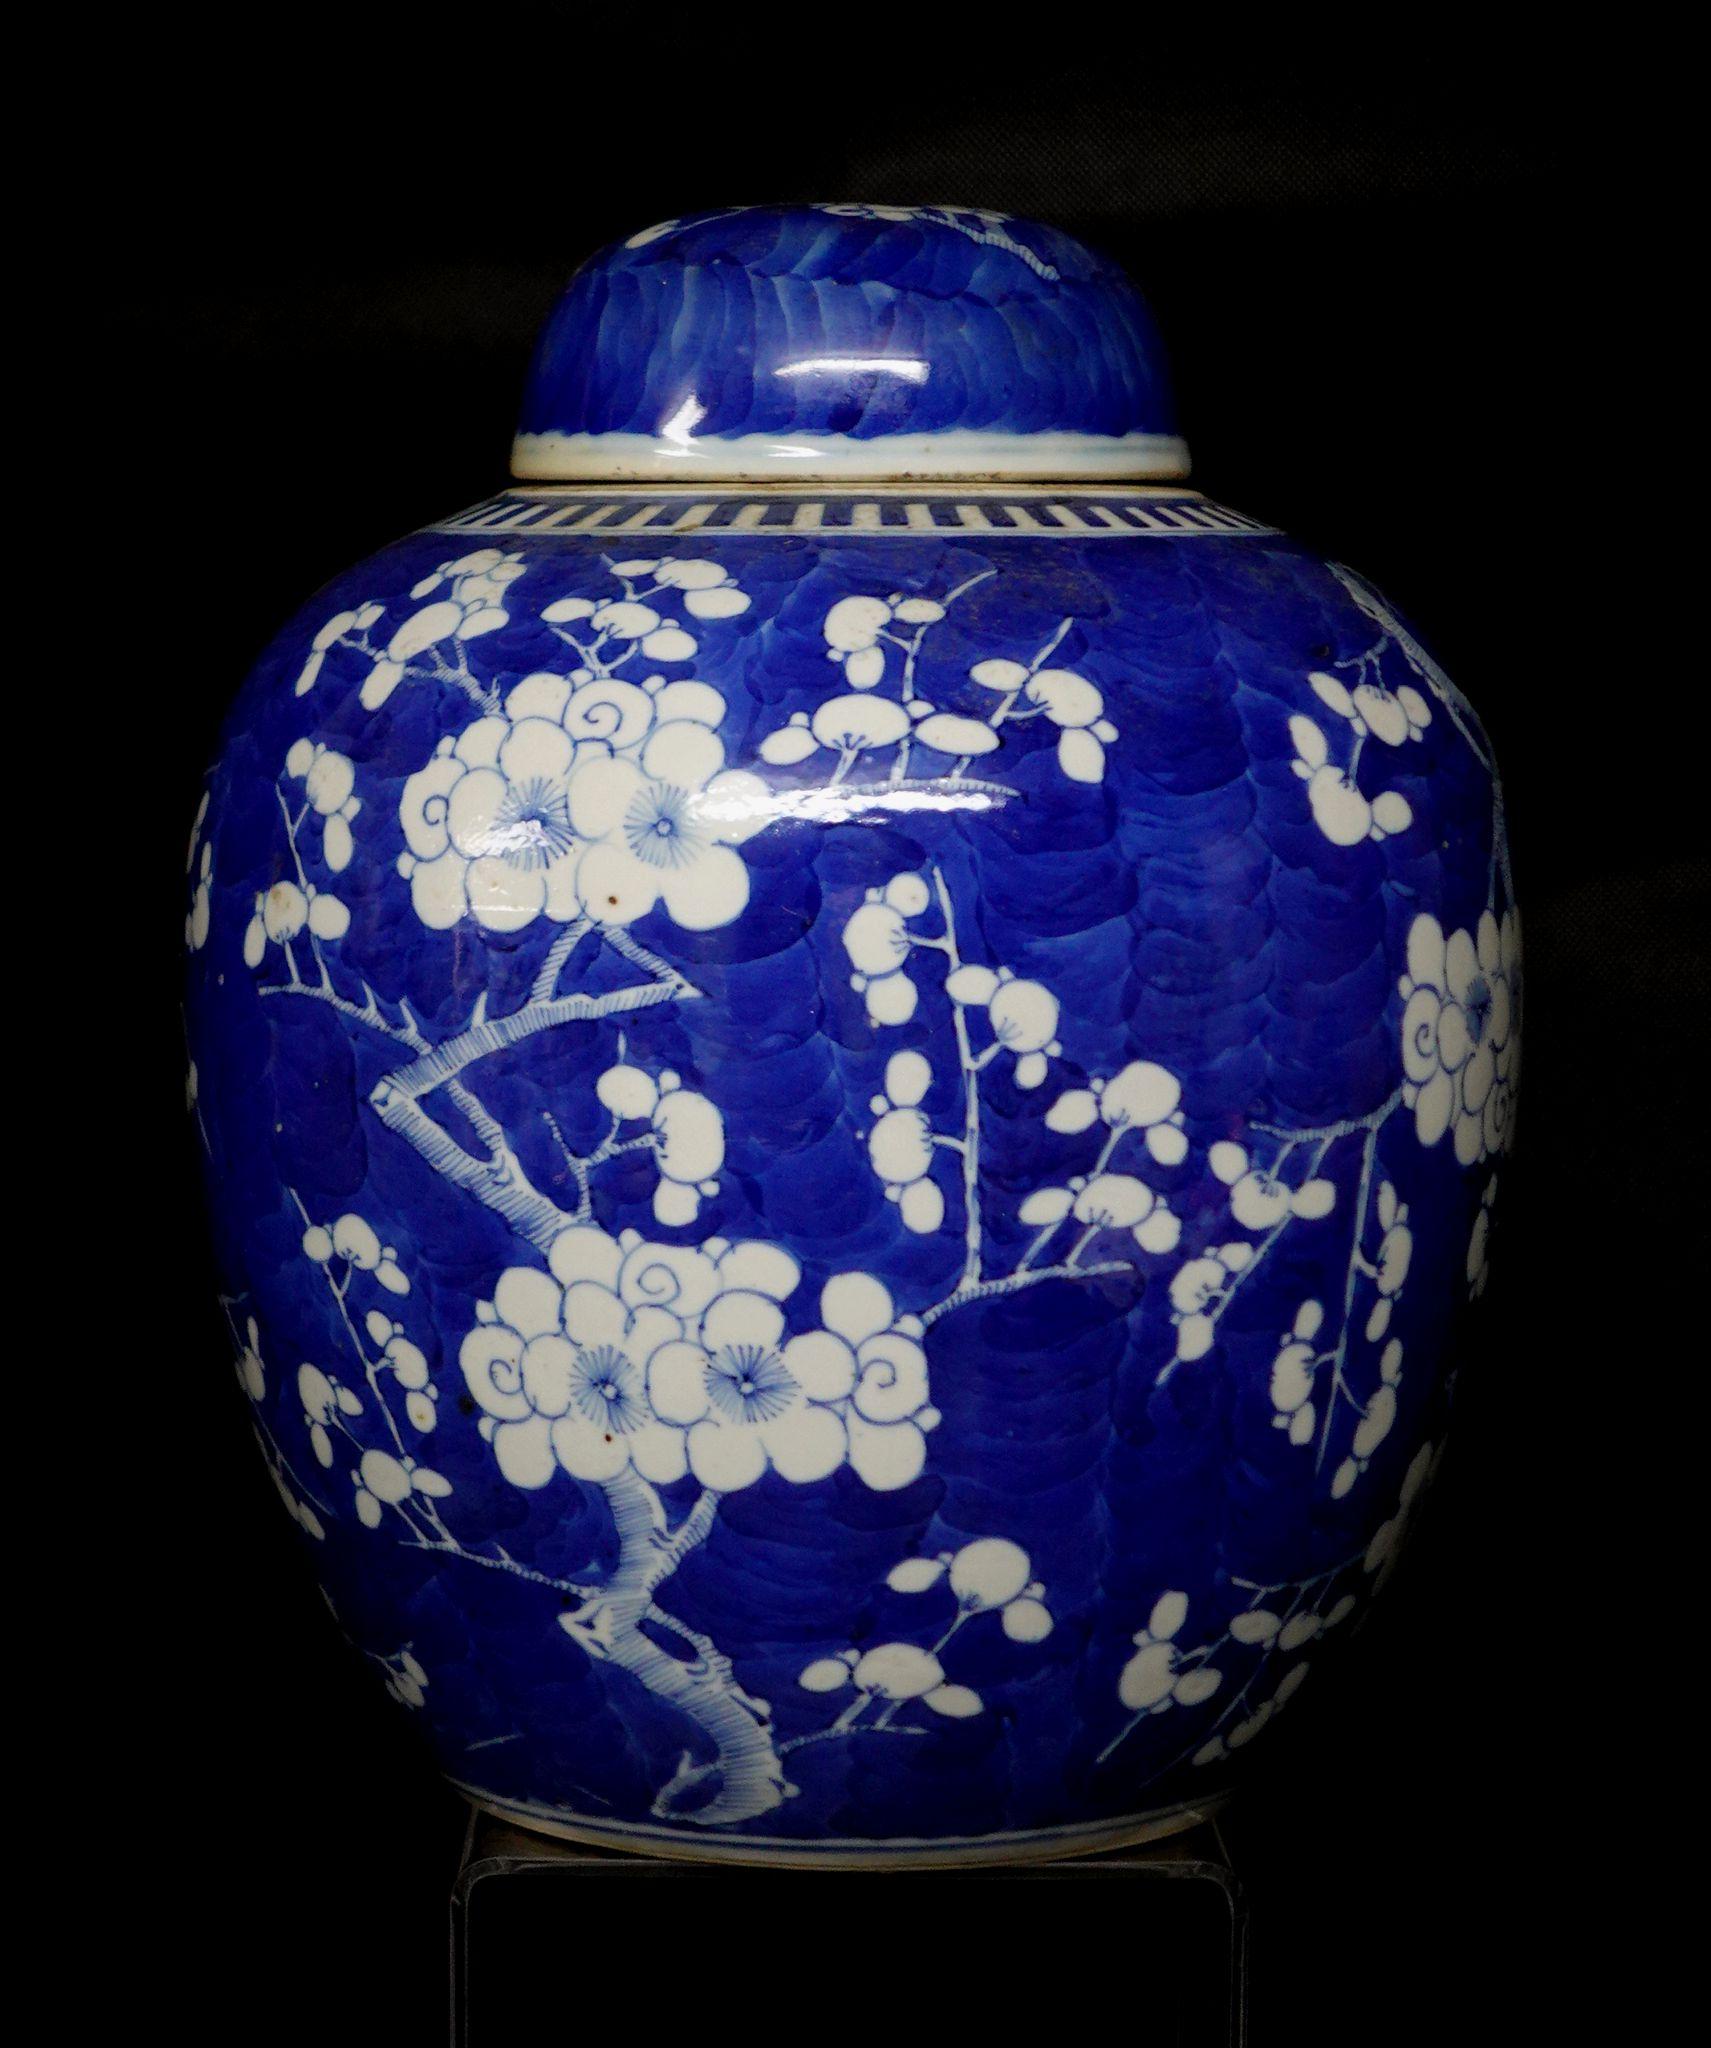 Qing Chinese Export Blue and White Porcelain Hawthorn Rose Jar with Lid, 19th Century